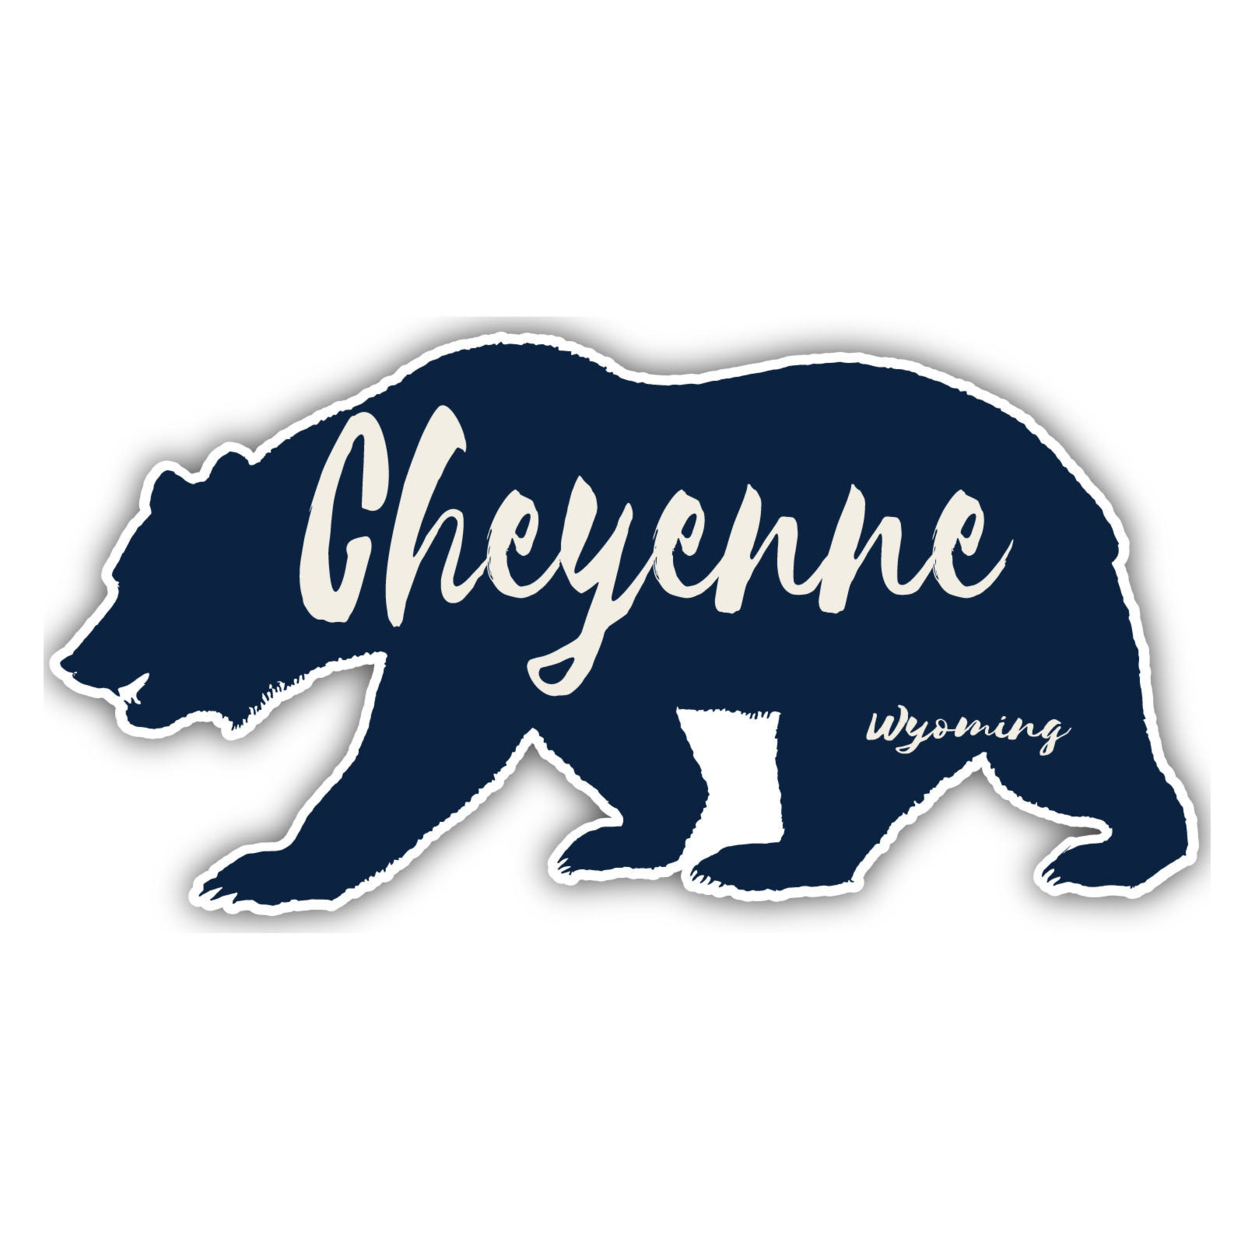 Cheyenne Wyoming Souvenir Decorative Stickers (Choose Theme And Size) - 4-Pack, 6-Inch, Camp Life